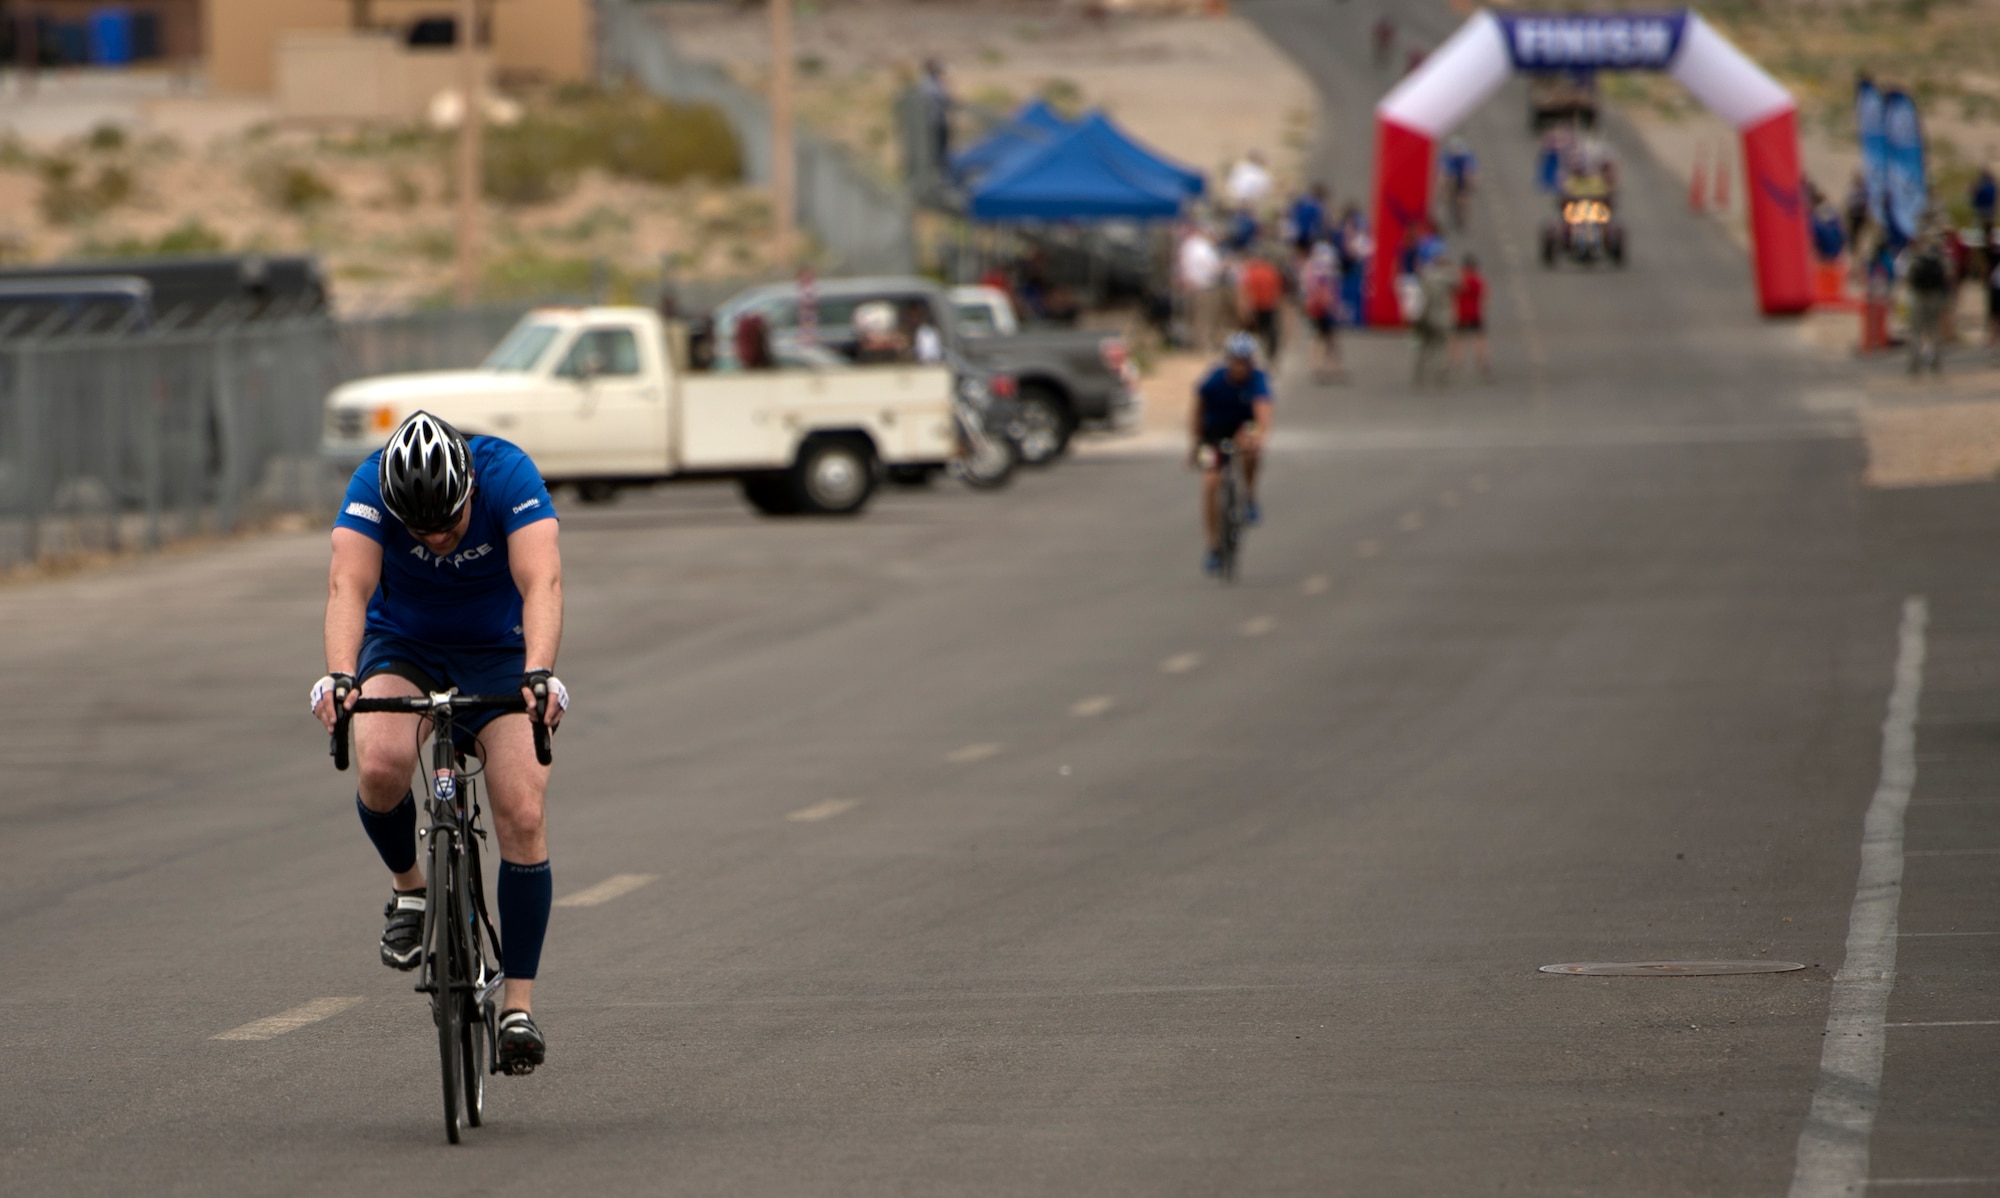 Cyclists pass through the finish line during the 18-mile men’s bicycle open April 9, 2014, at Nellis Air Force Base, Nev.  The cyclists circled a two mile loop based upon how many miles they needed to accomplish for their particular race.  (U.S. Air Force photo/Senior Airman Jette Carr)